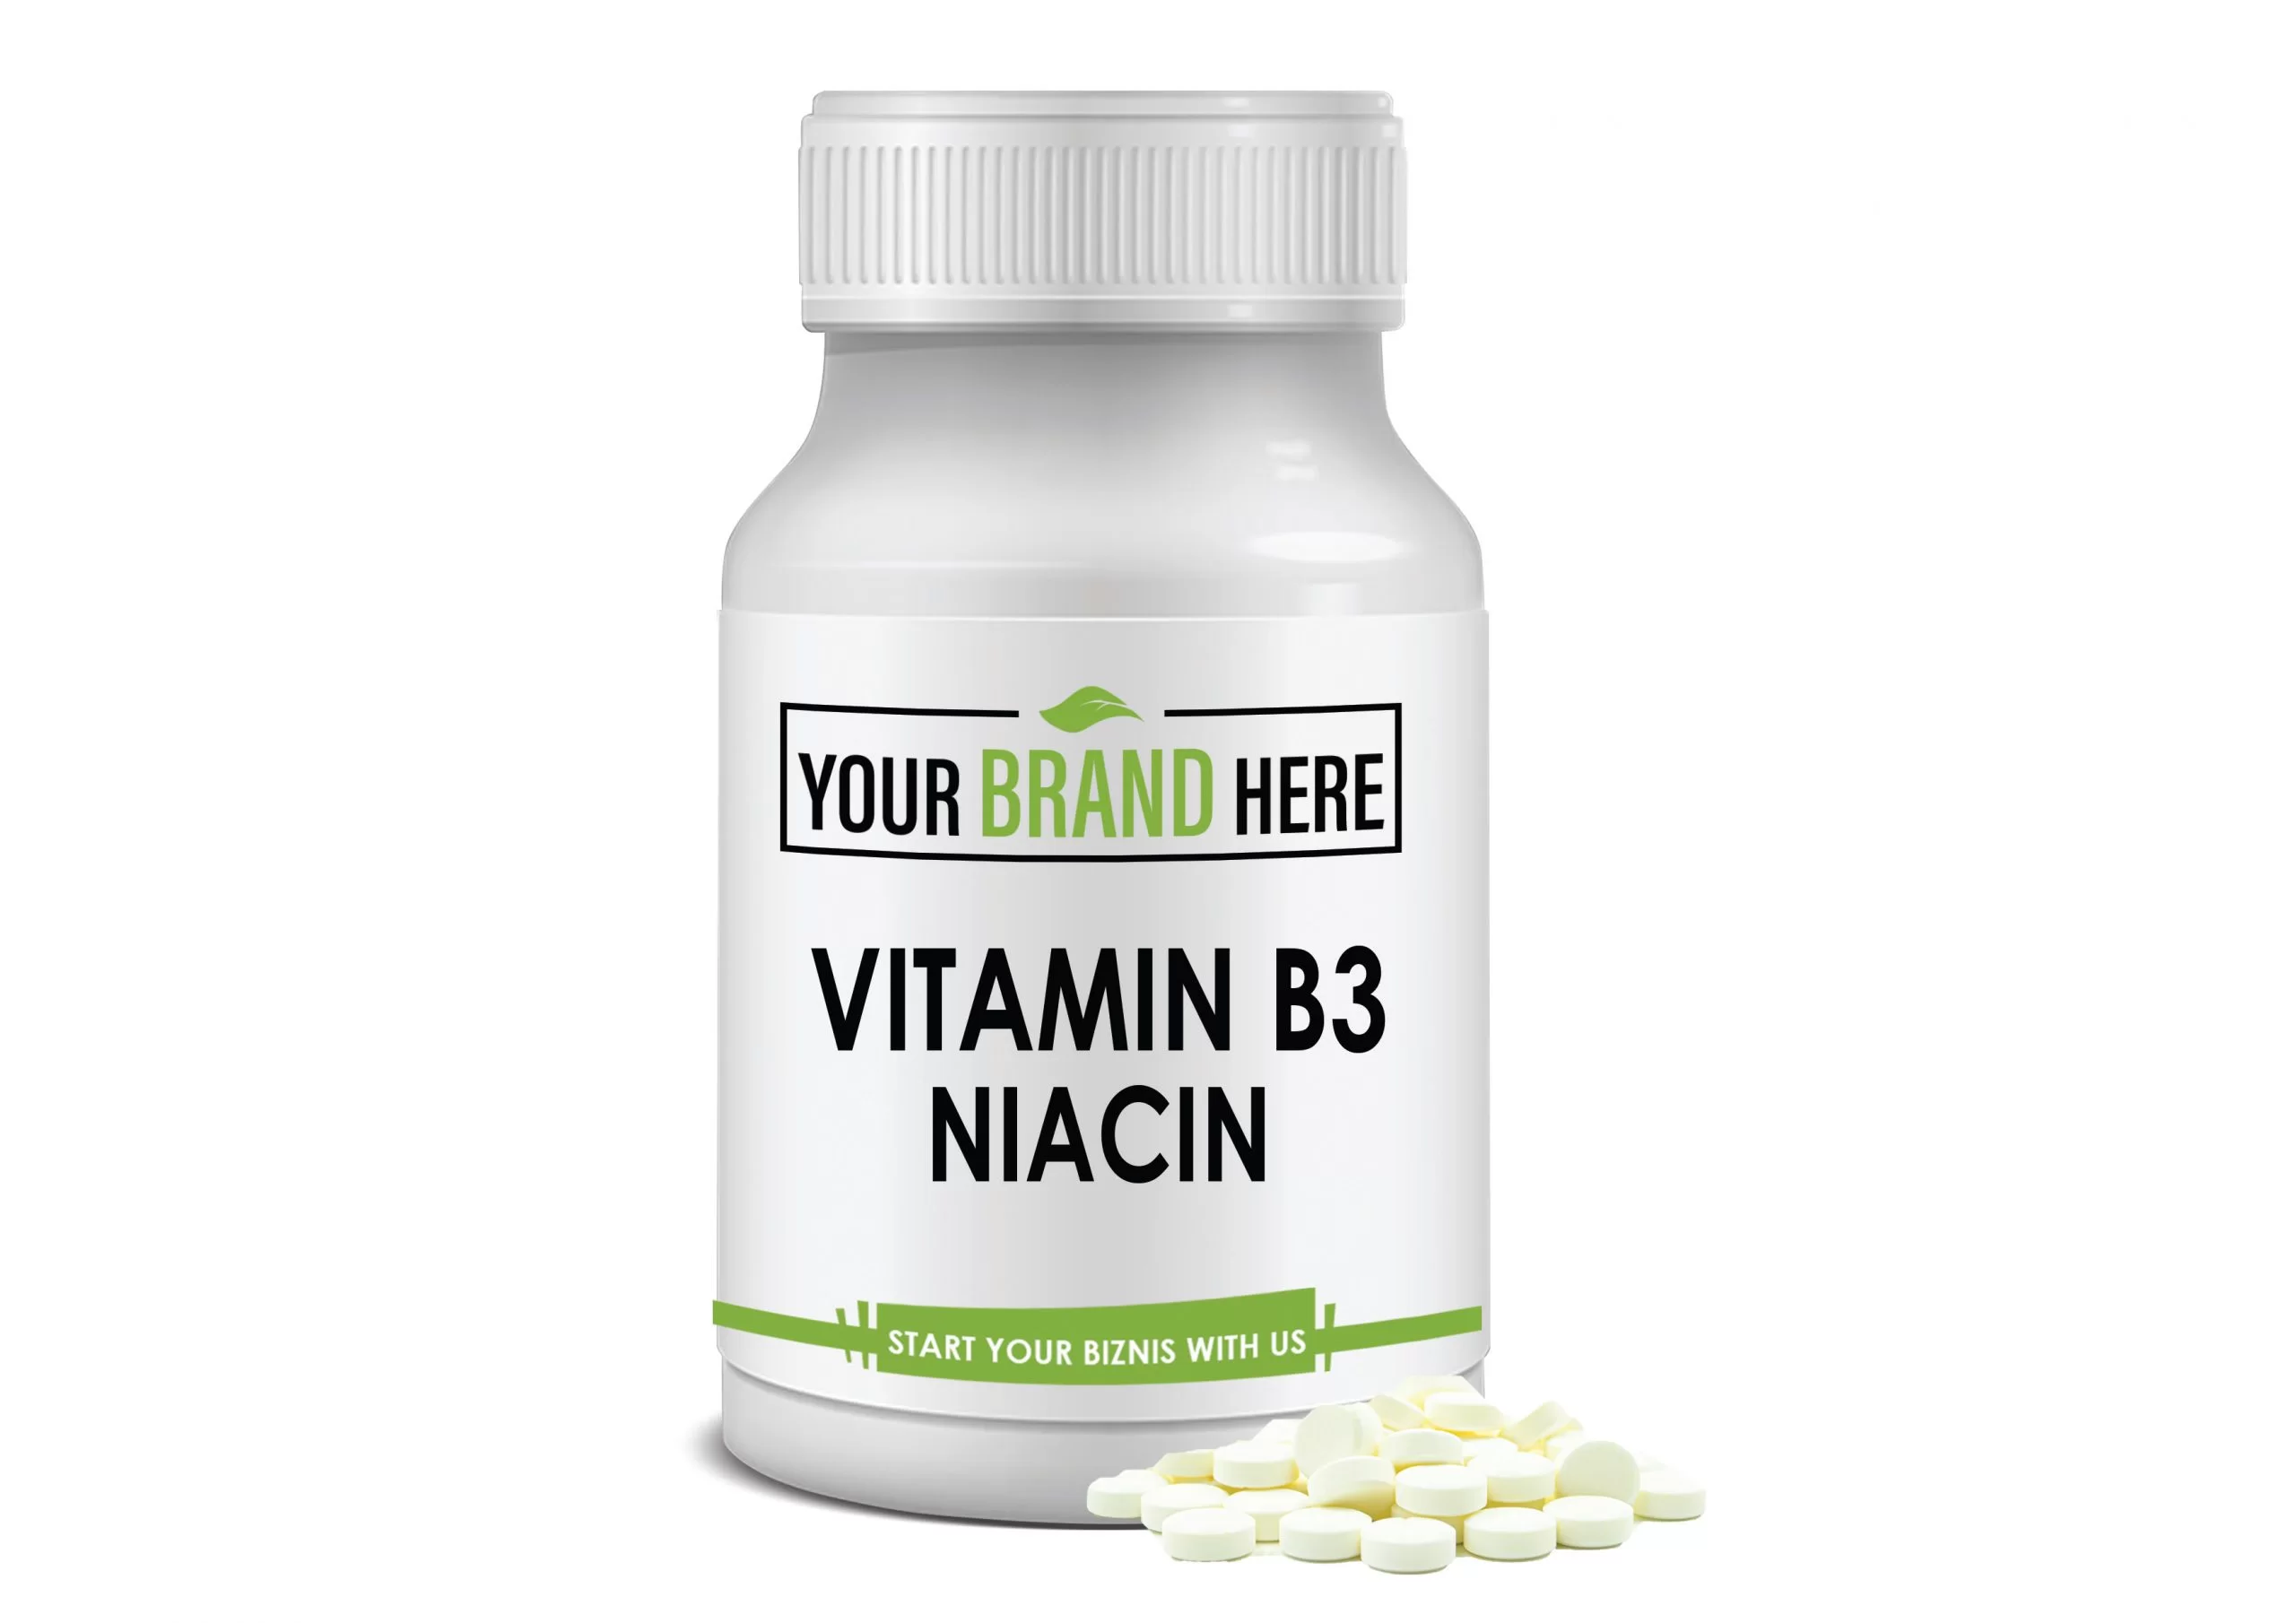 Which food has niacin? Which food has the most niacin?